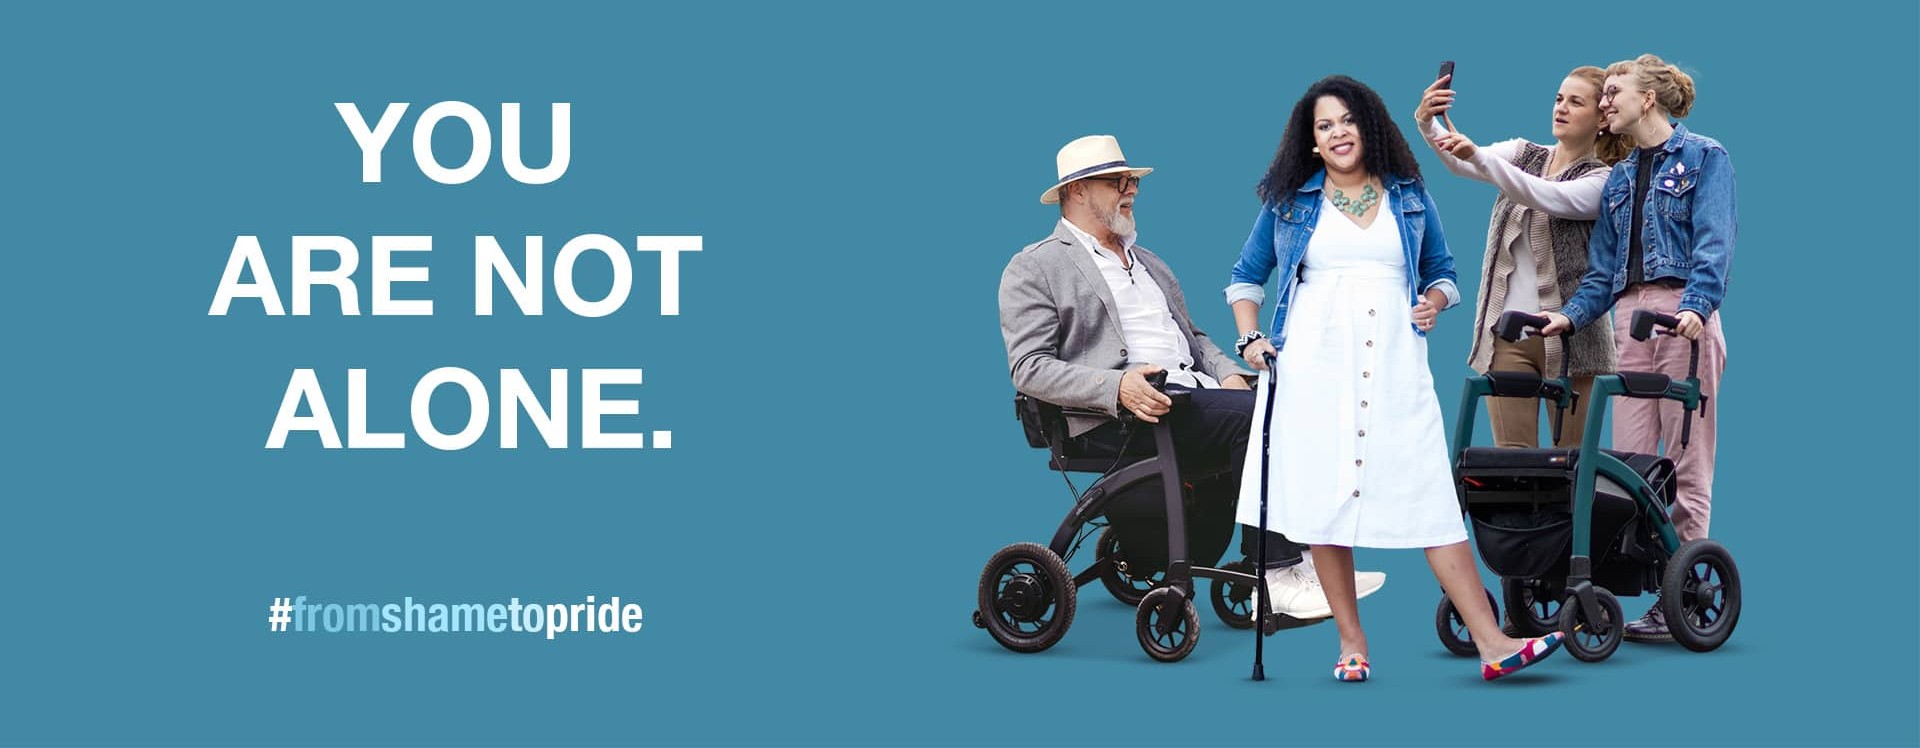 From shame to pride campaign about disability